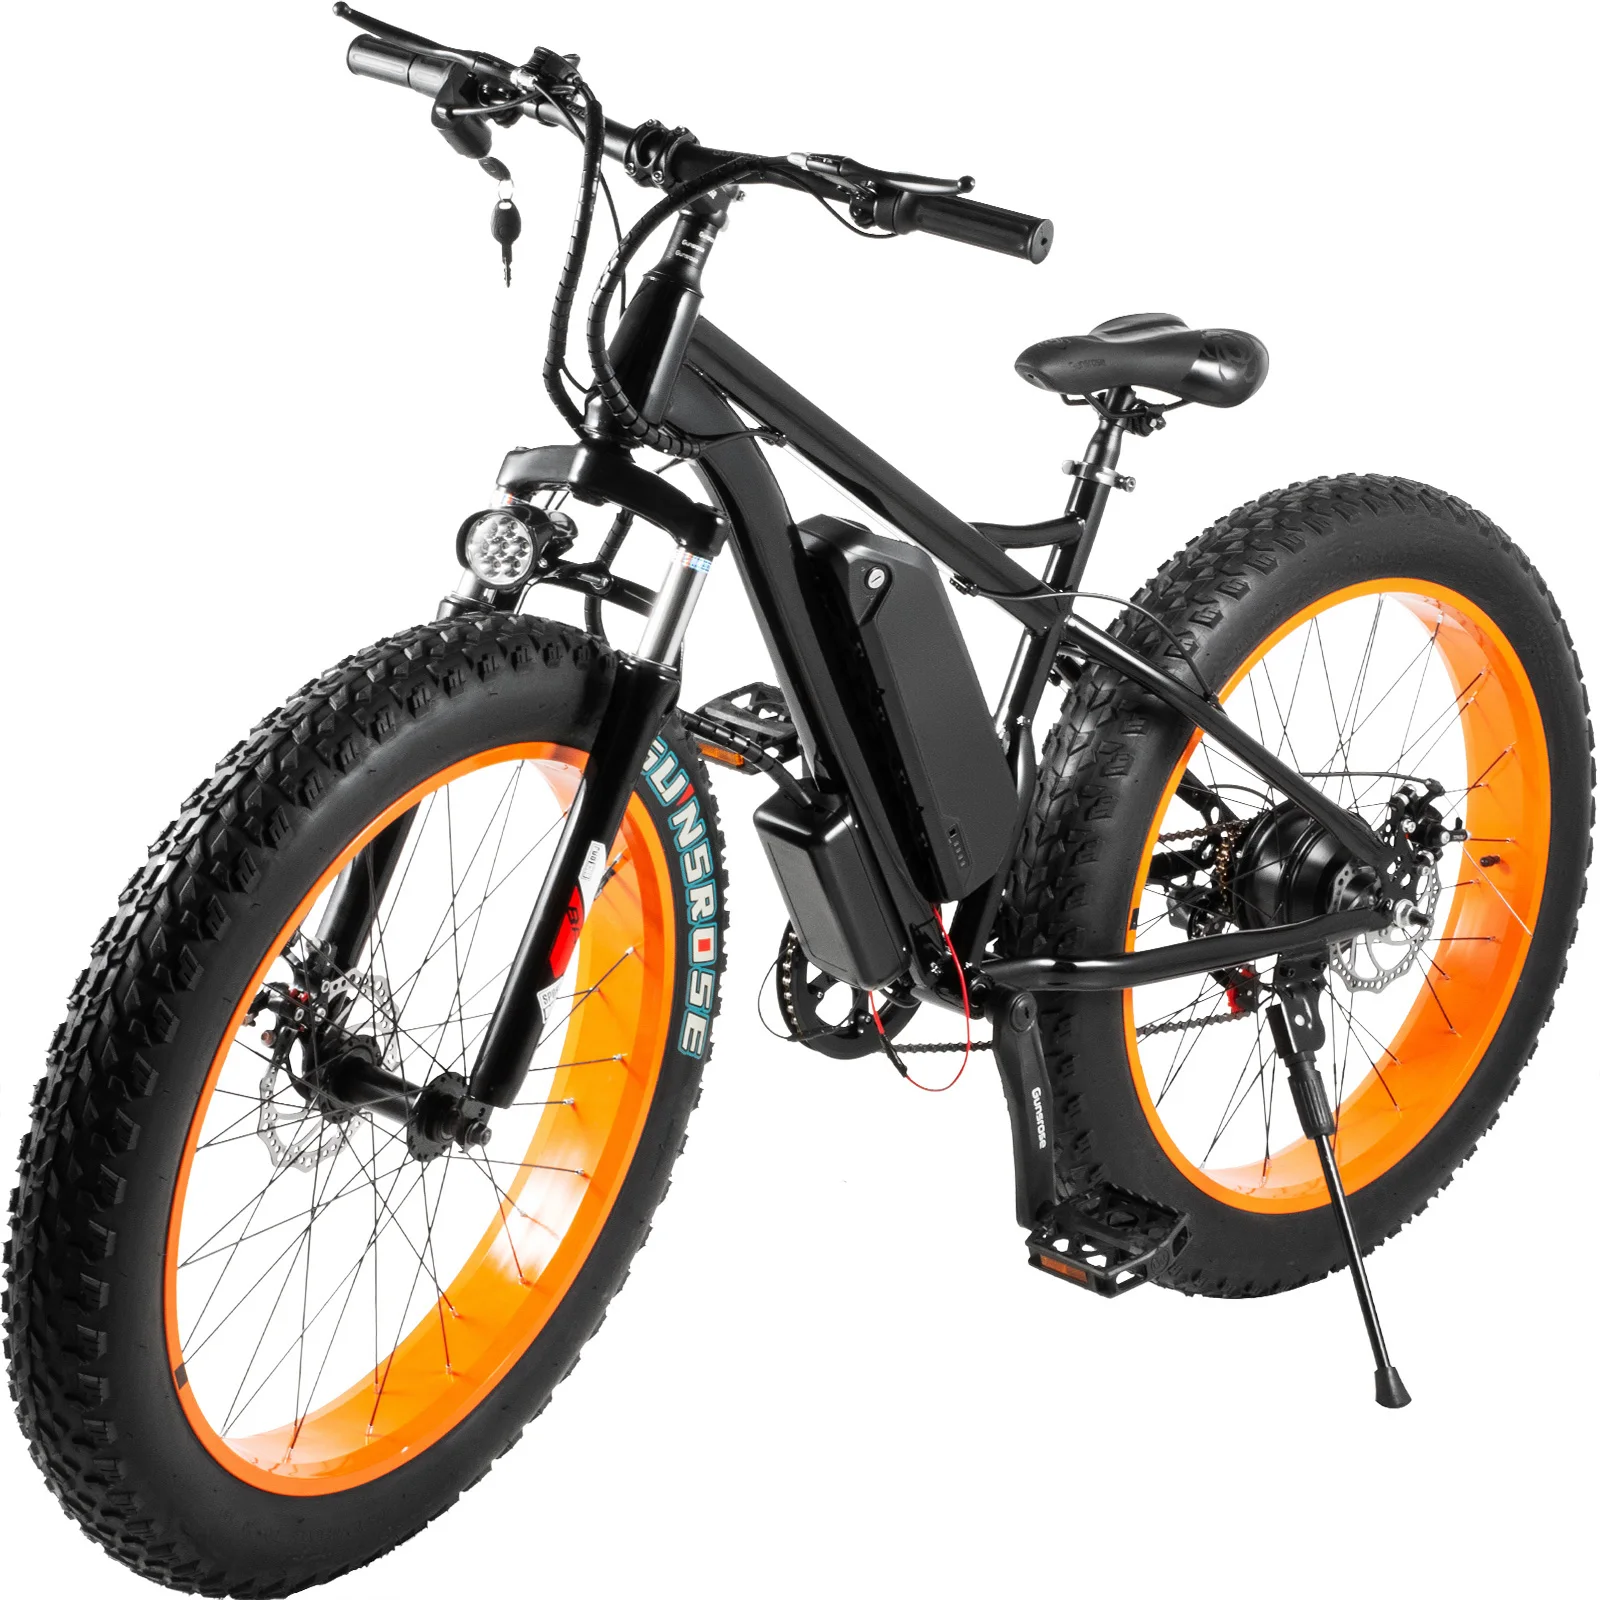 China Factory Direct Price 48v 350w Full Suspension Ebike Fat Tire Electric Bicycle Bike Mtb Mountain/snow/dirt Bike For Sale